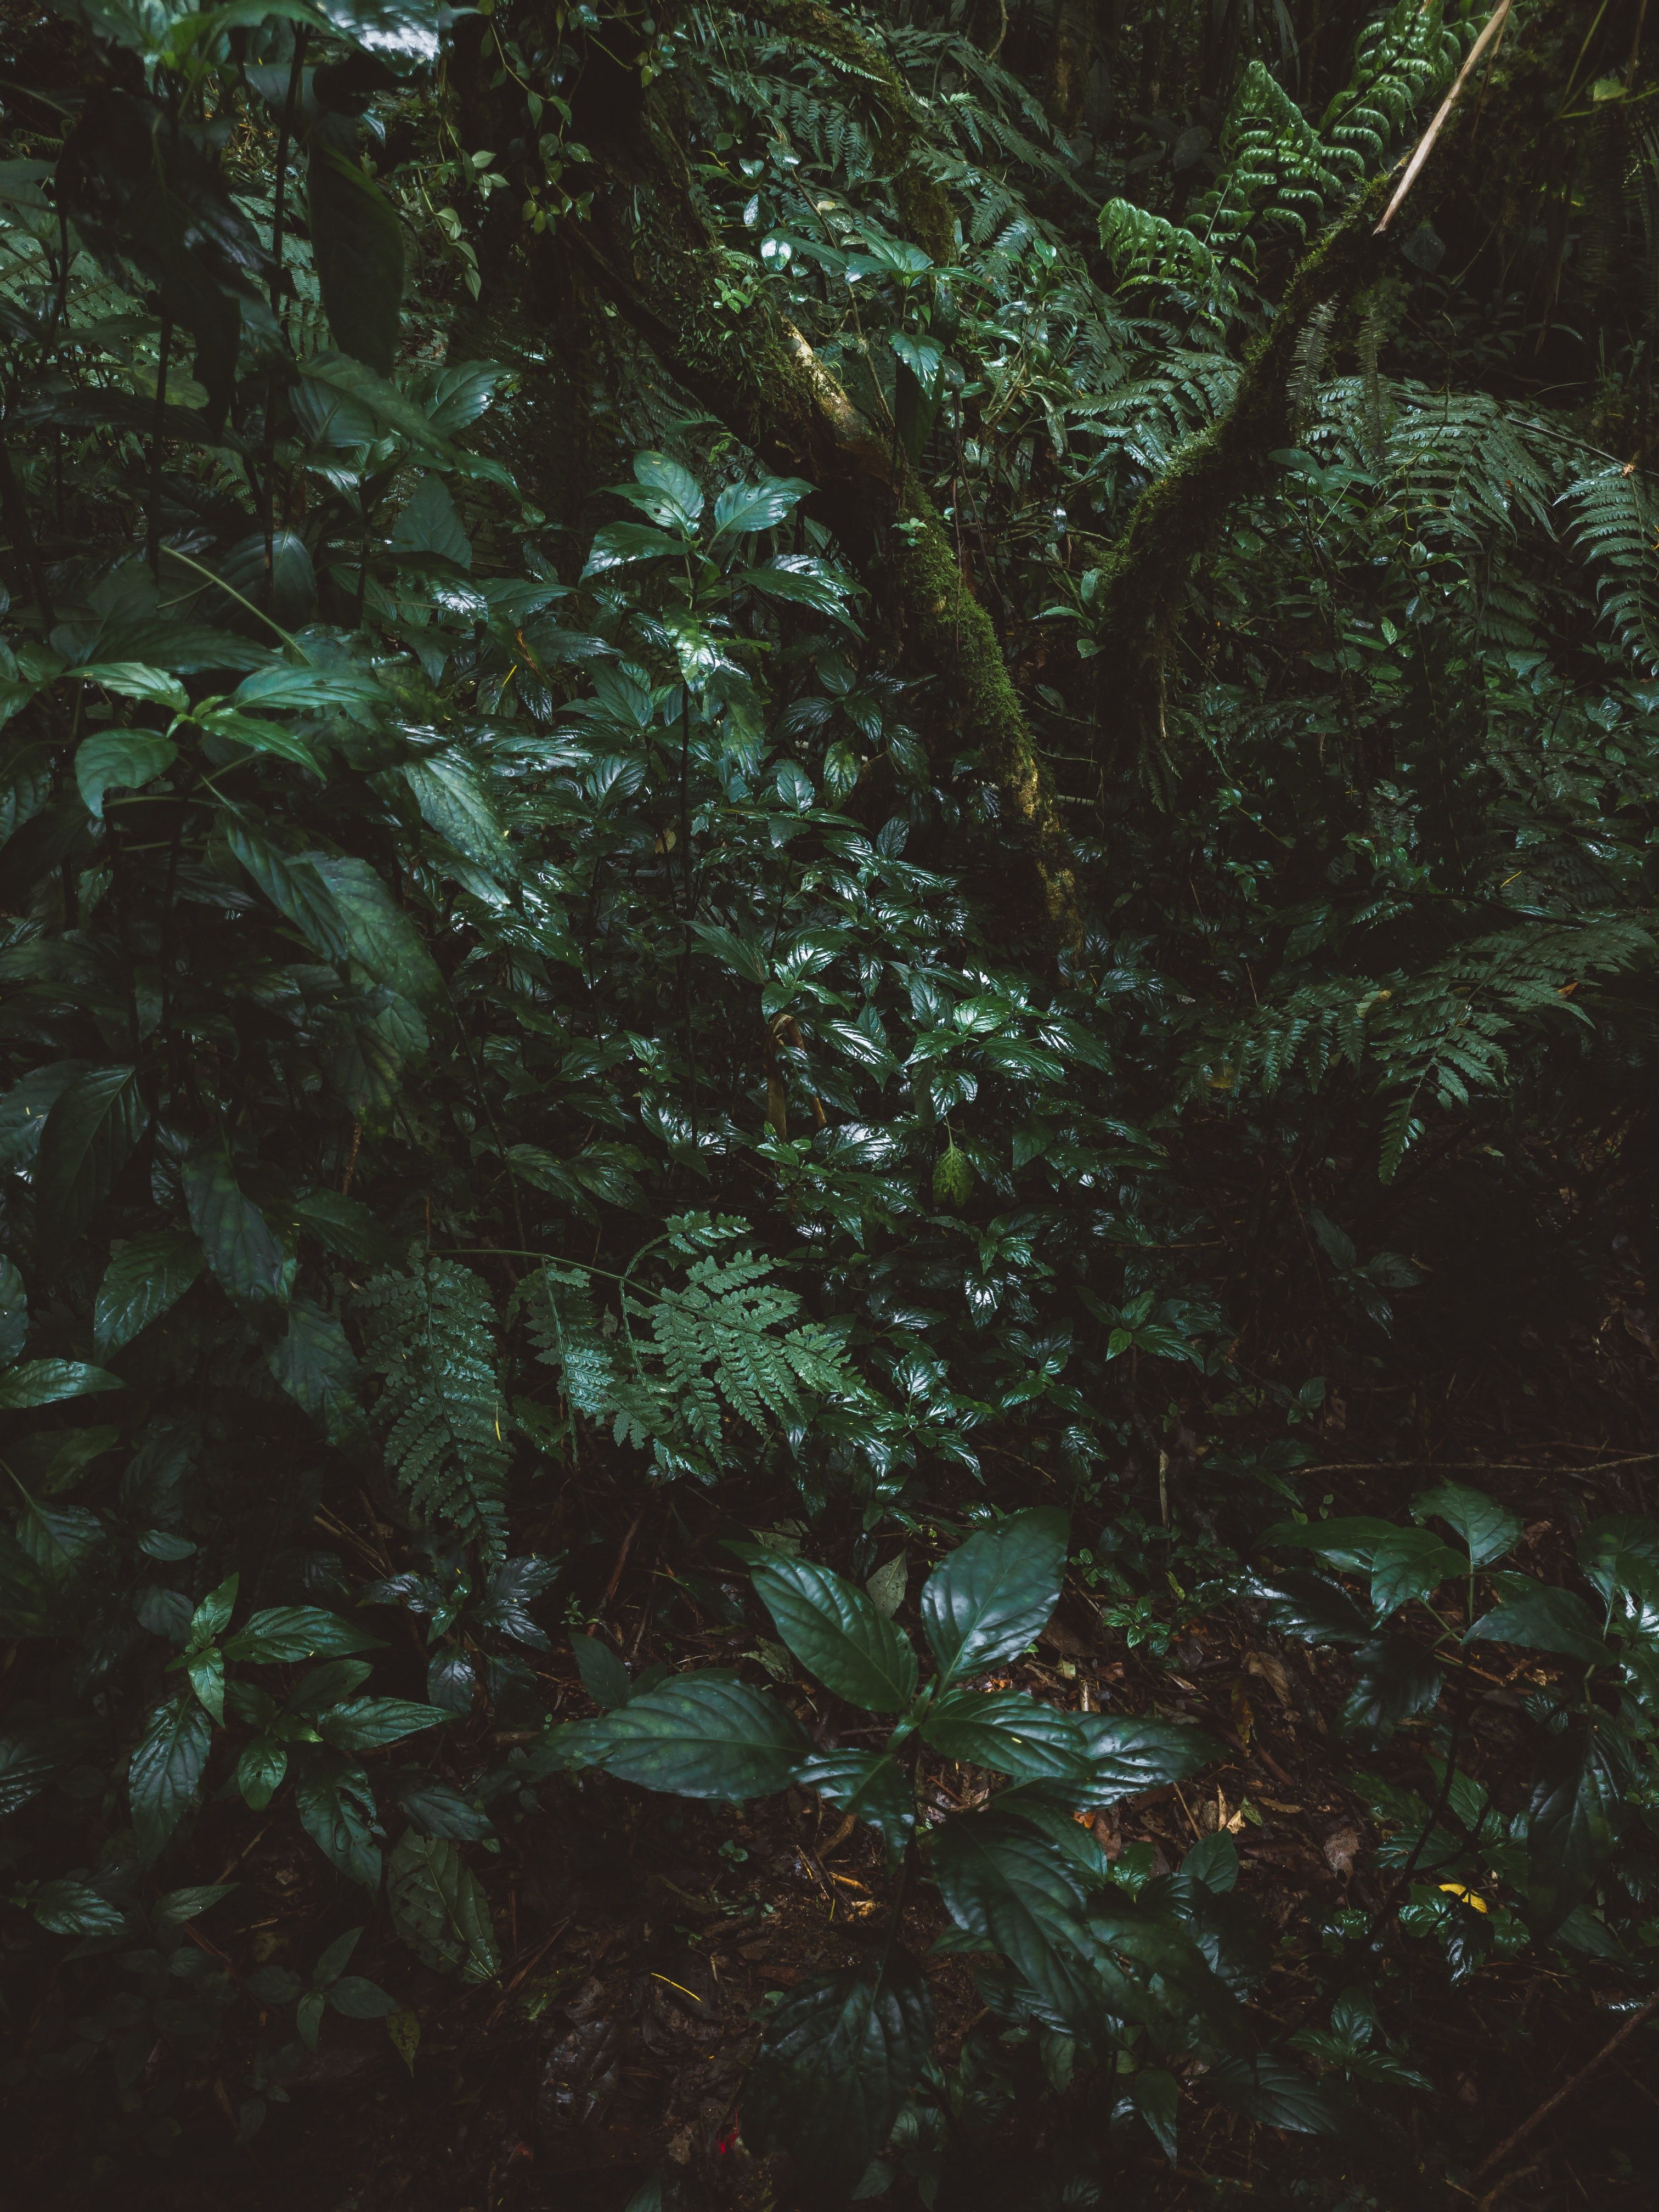 A dense patch of green leaves and vines in a dark forest. - Jungle